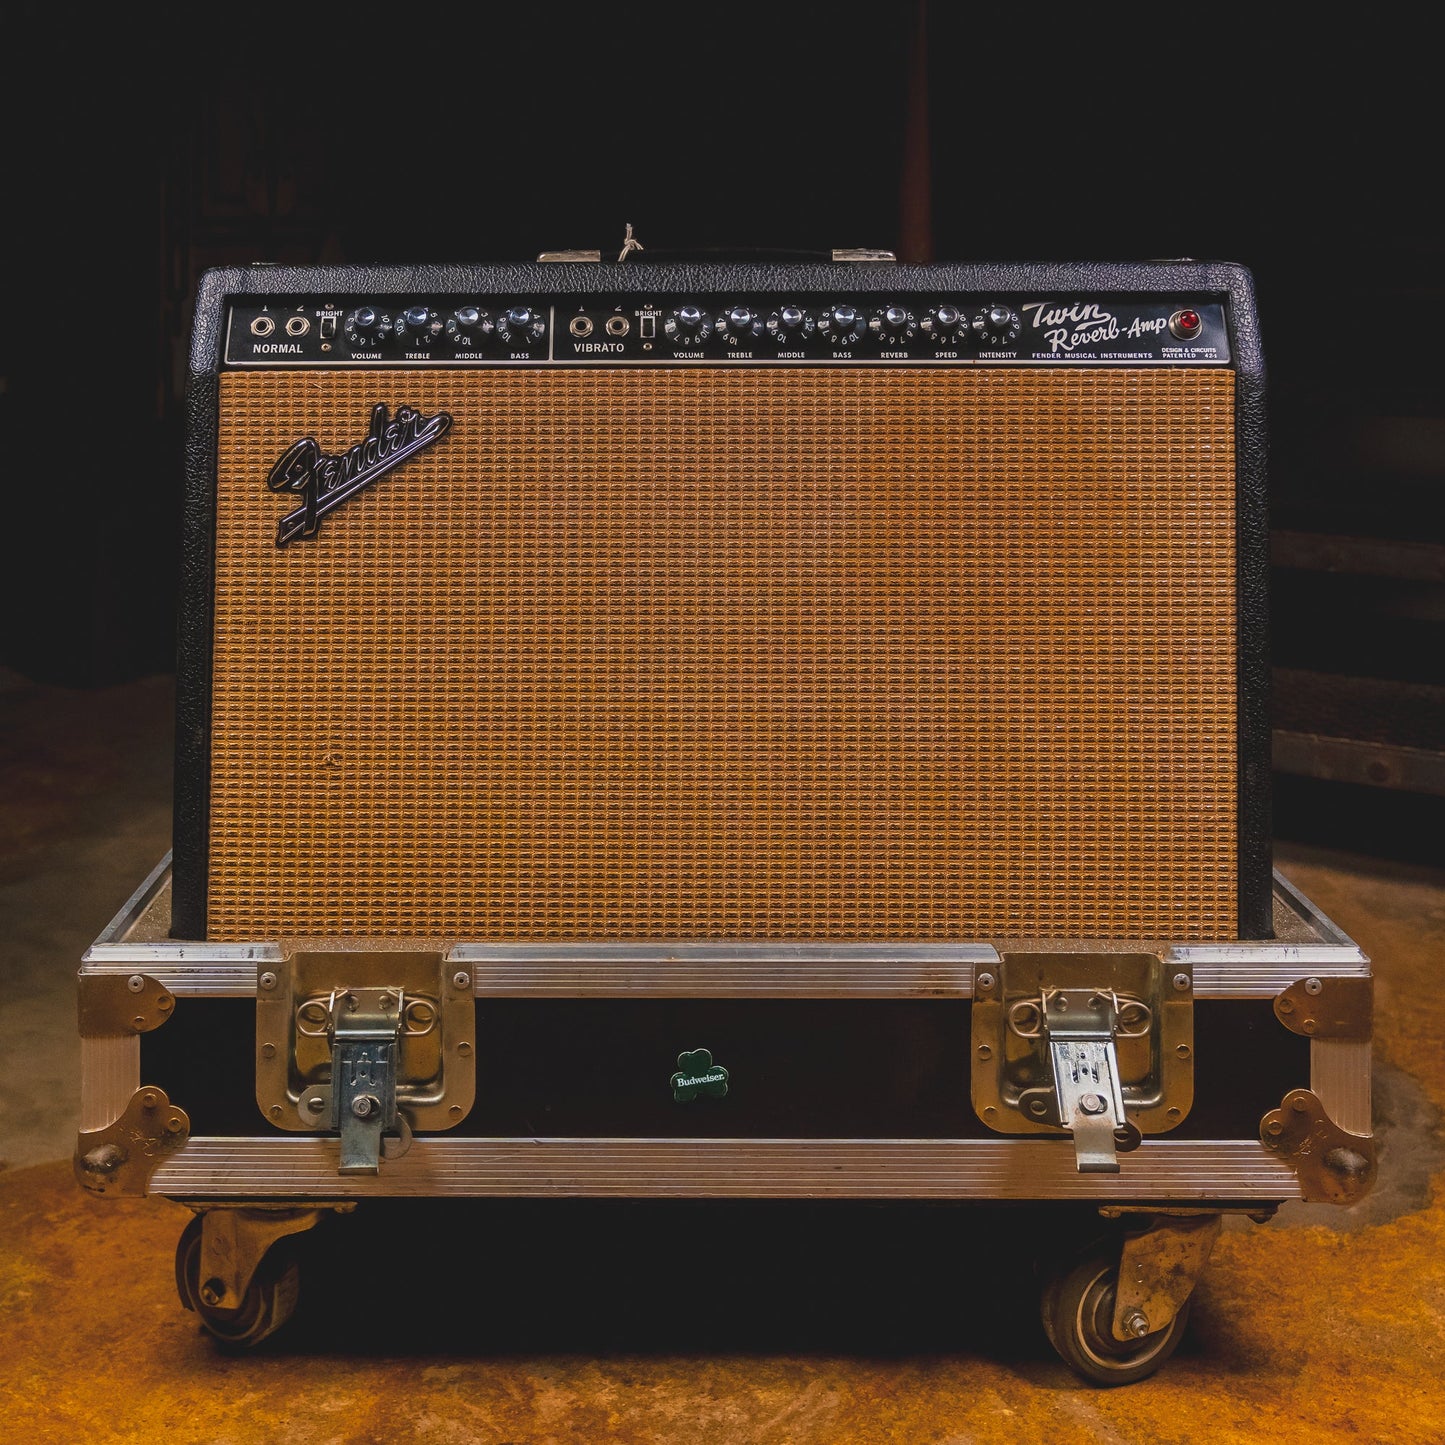 1965 Fender Twin Reverb Guita rCombo Tube Amplifier w/Calzone Case - Used